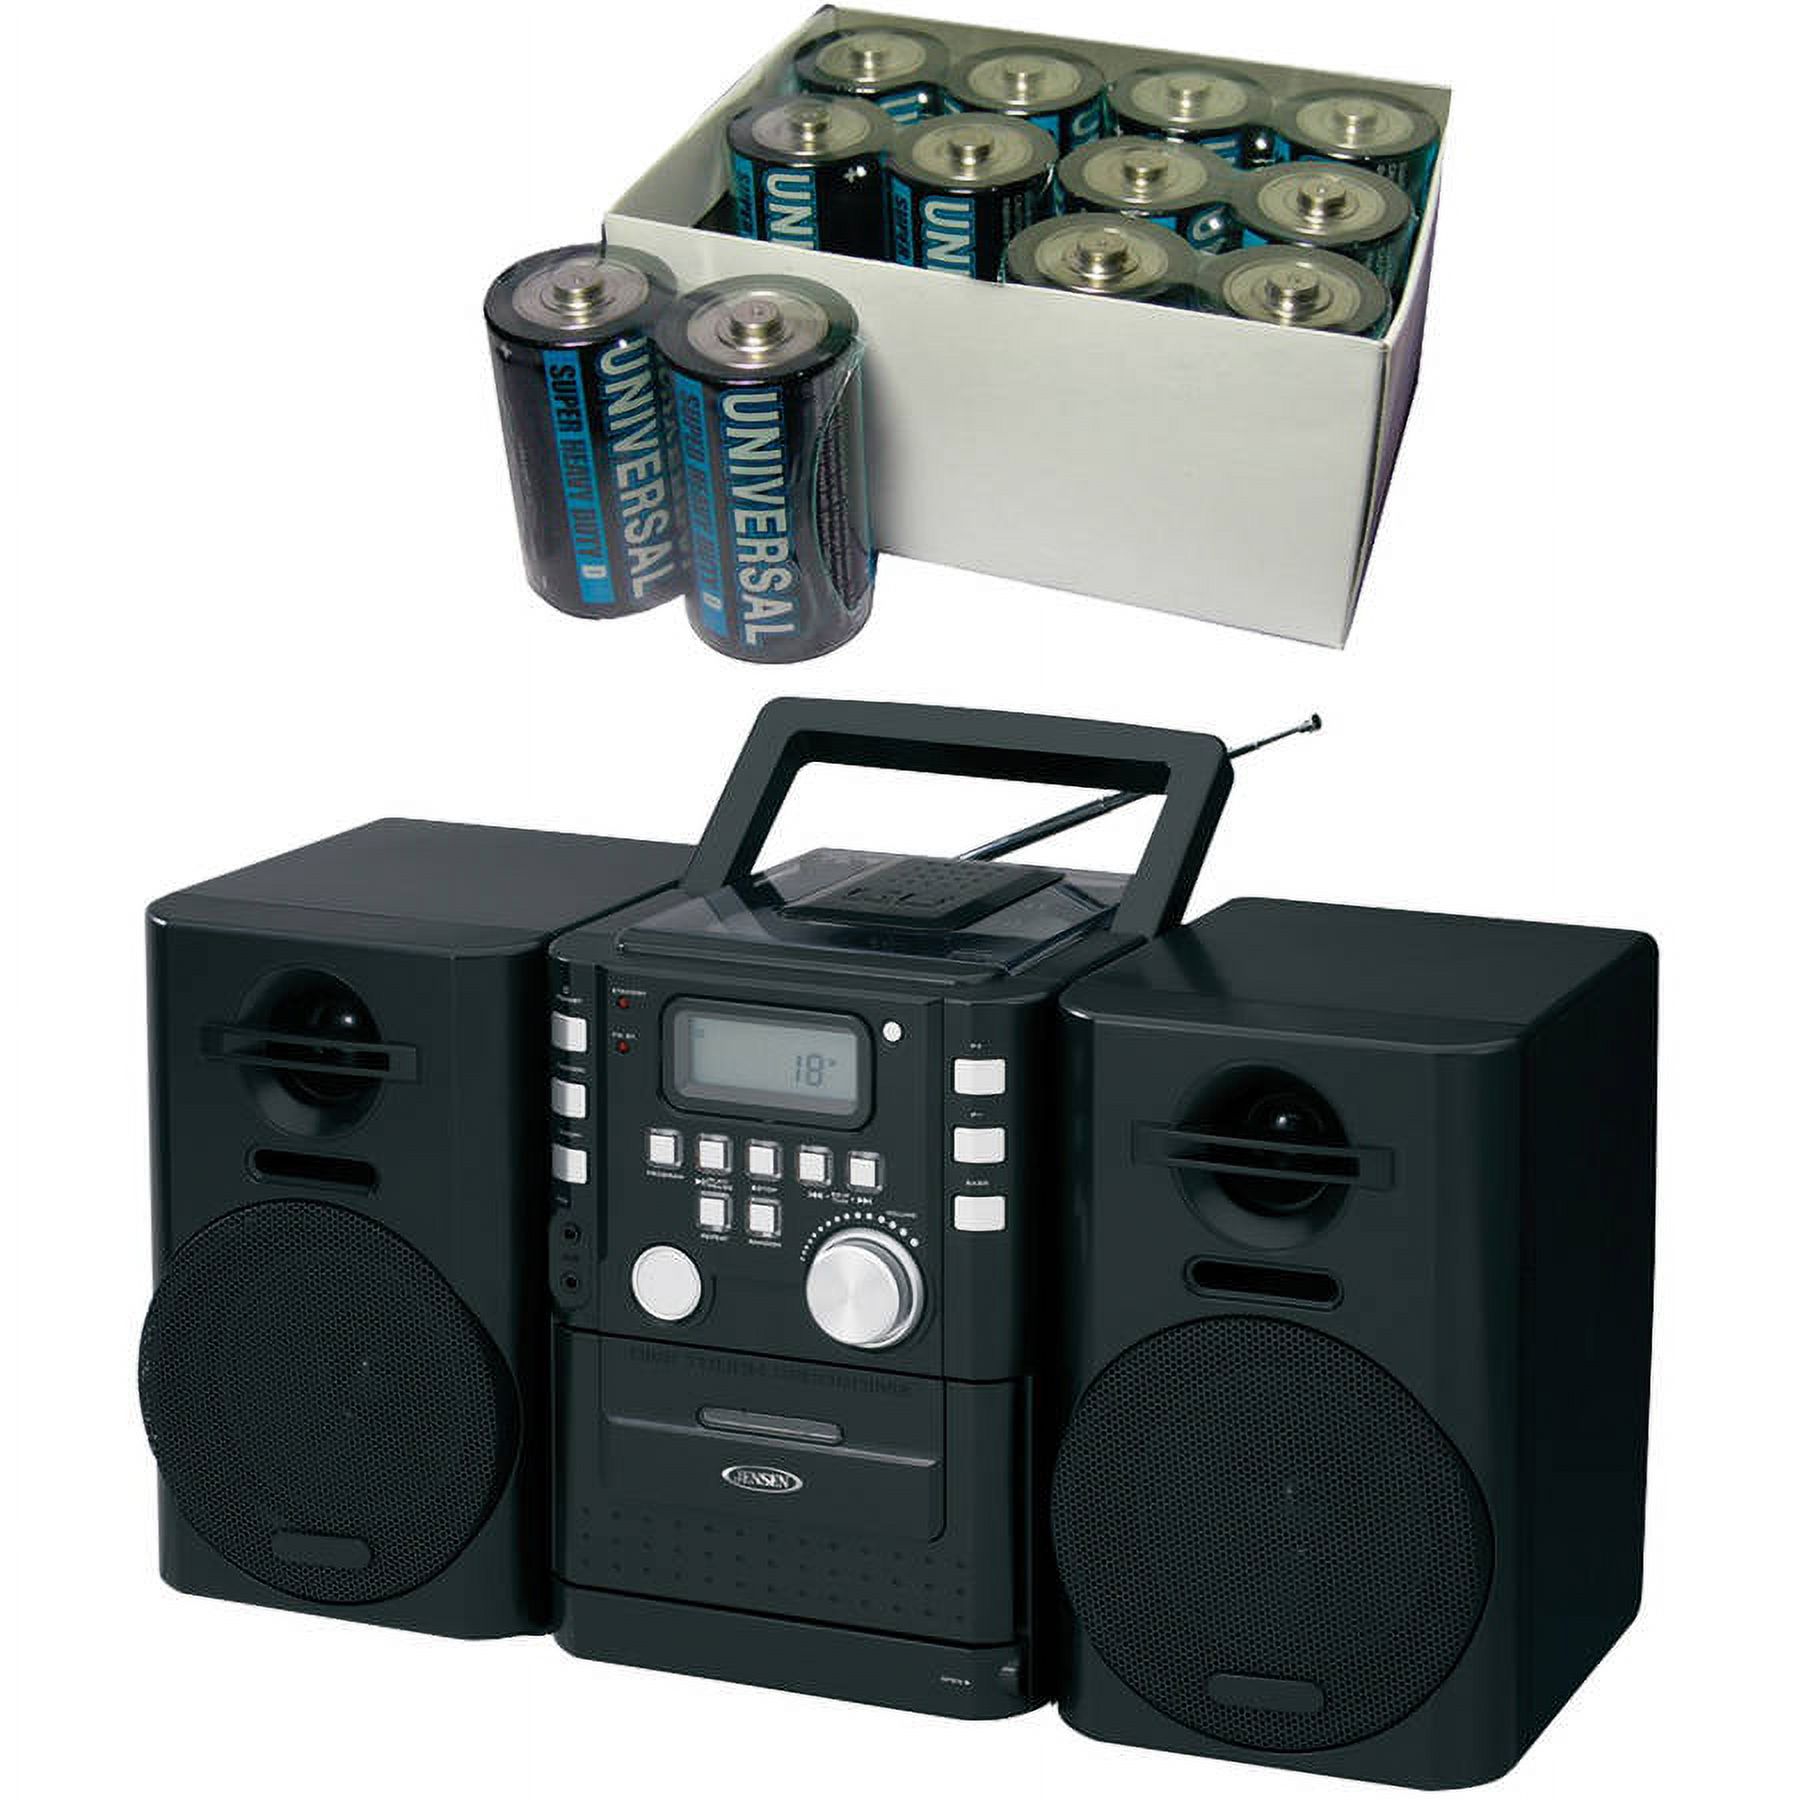 Jensen CD-725 CD Music System with Cassette and FM Stereo Radio, Includes 12 D Batteries - image 1 of 1